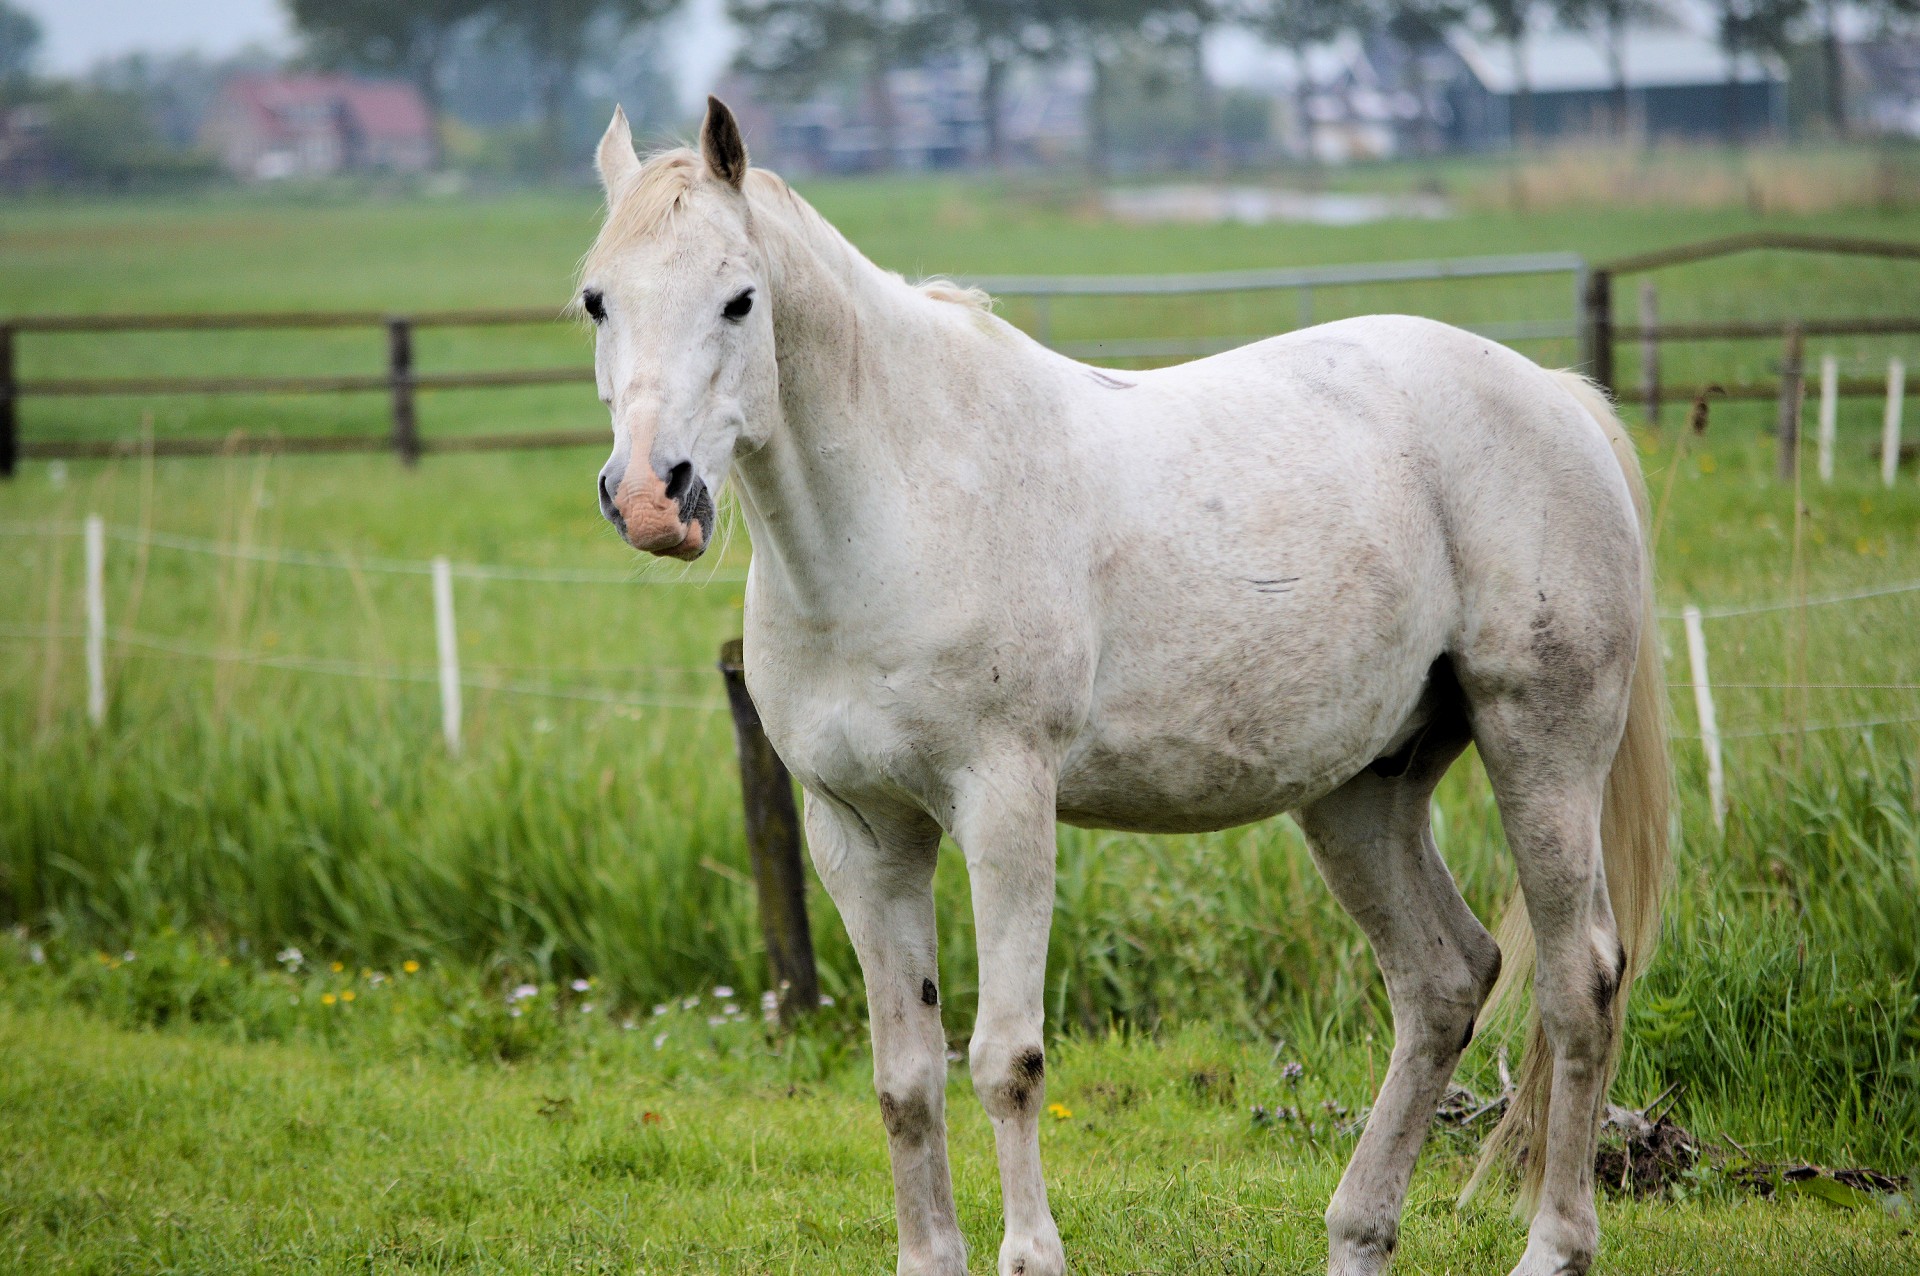 A picture of a white horse